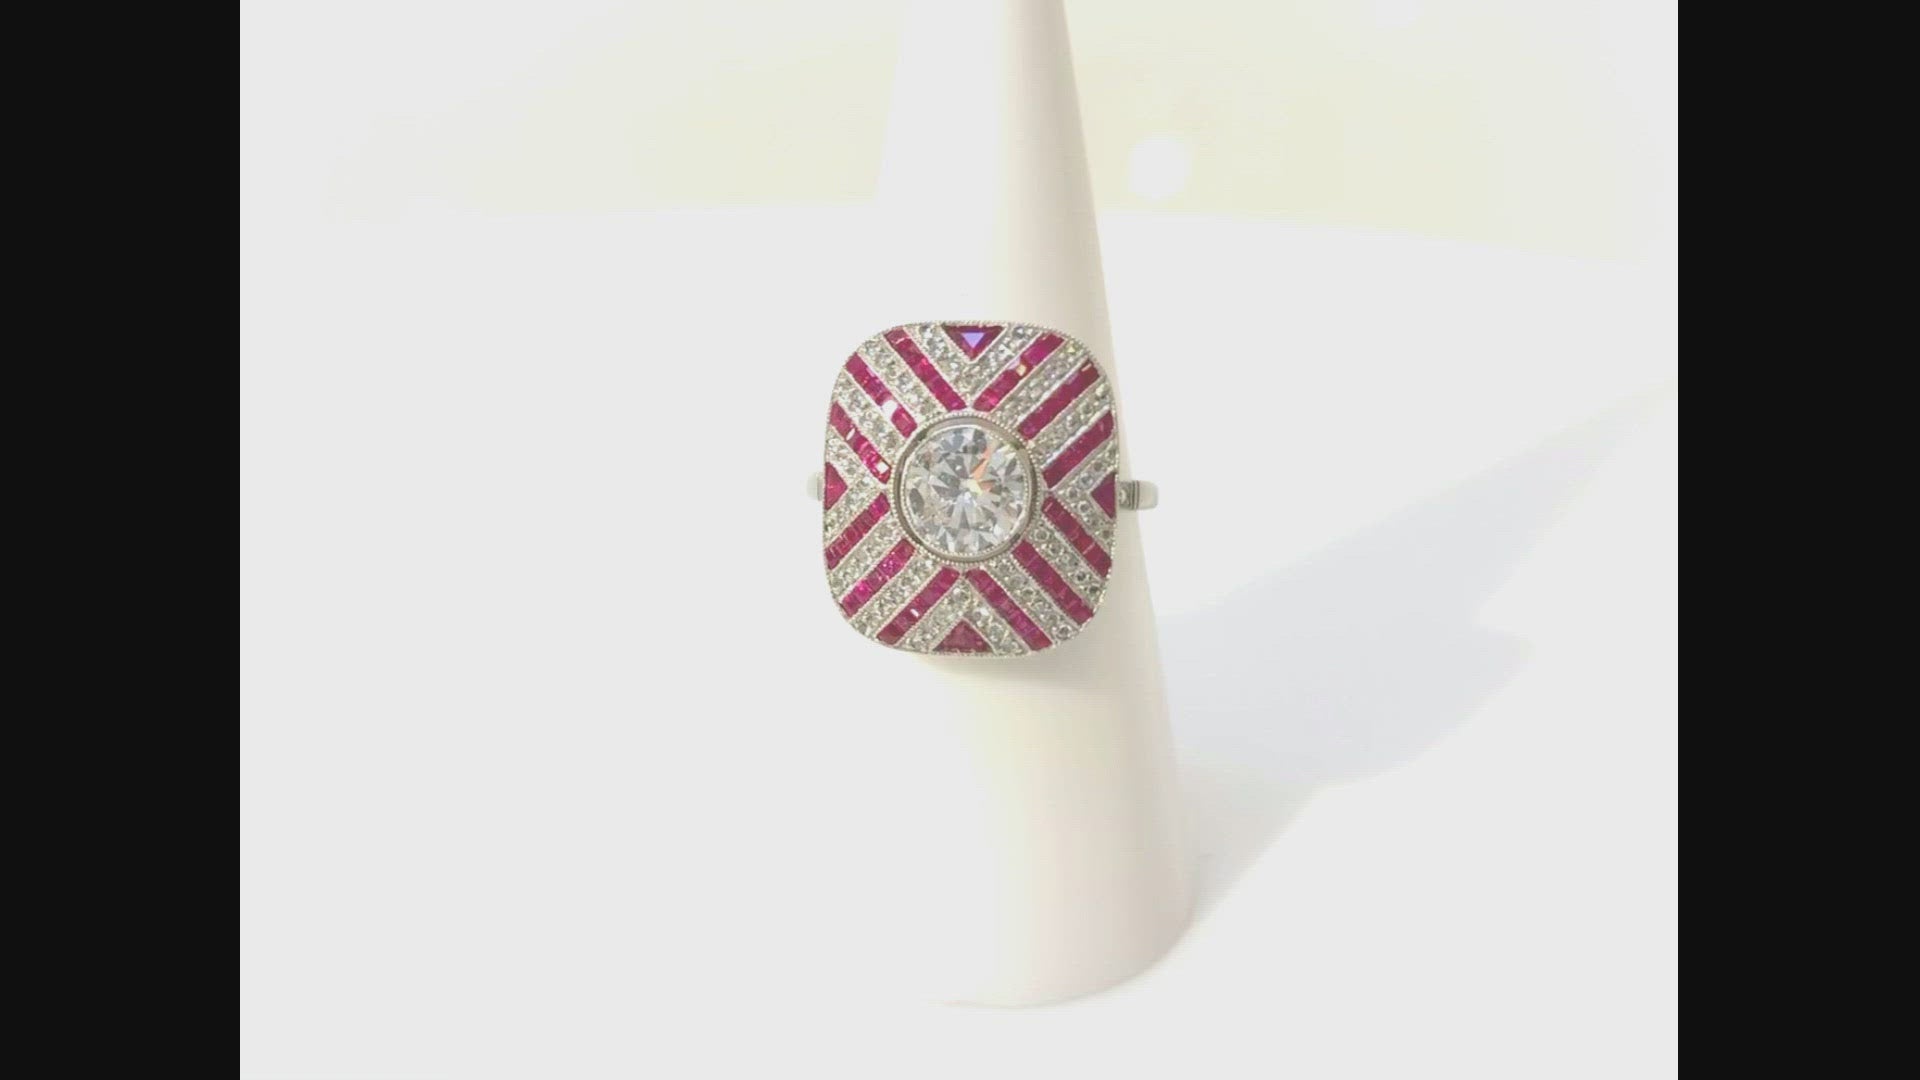 A rubies and diamonds platinum dome ring with a striped pattern. 